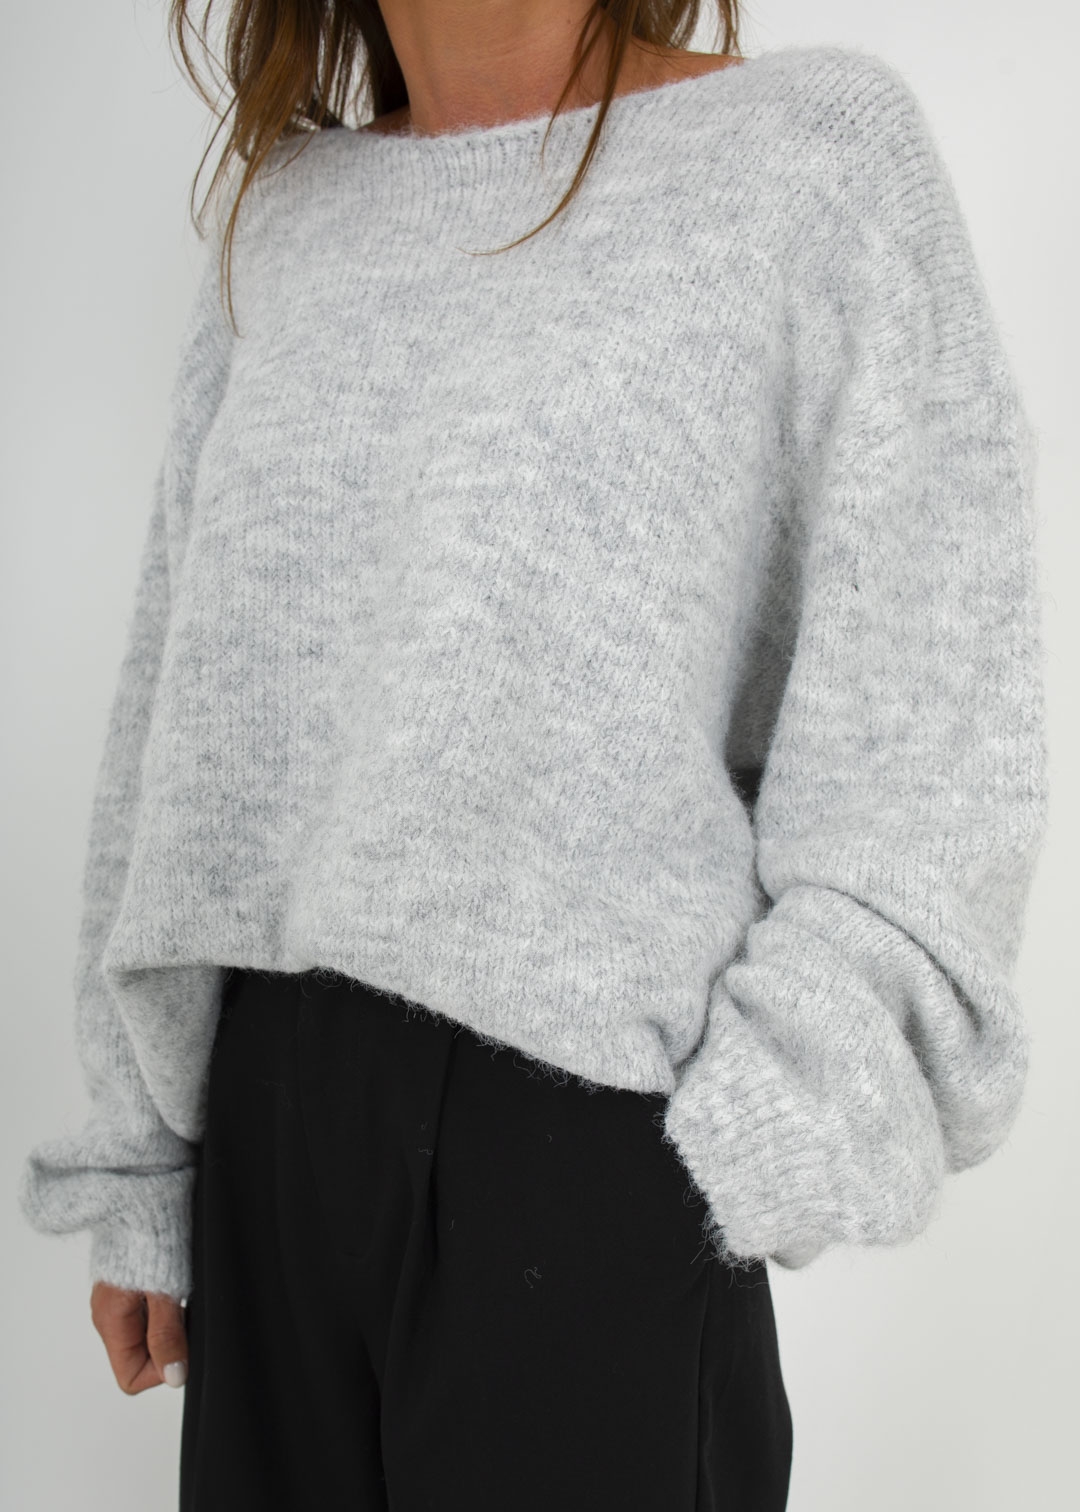 GREY SWEATER WITH BOWS